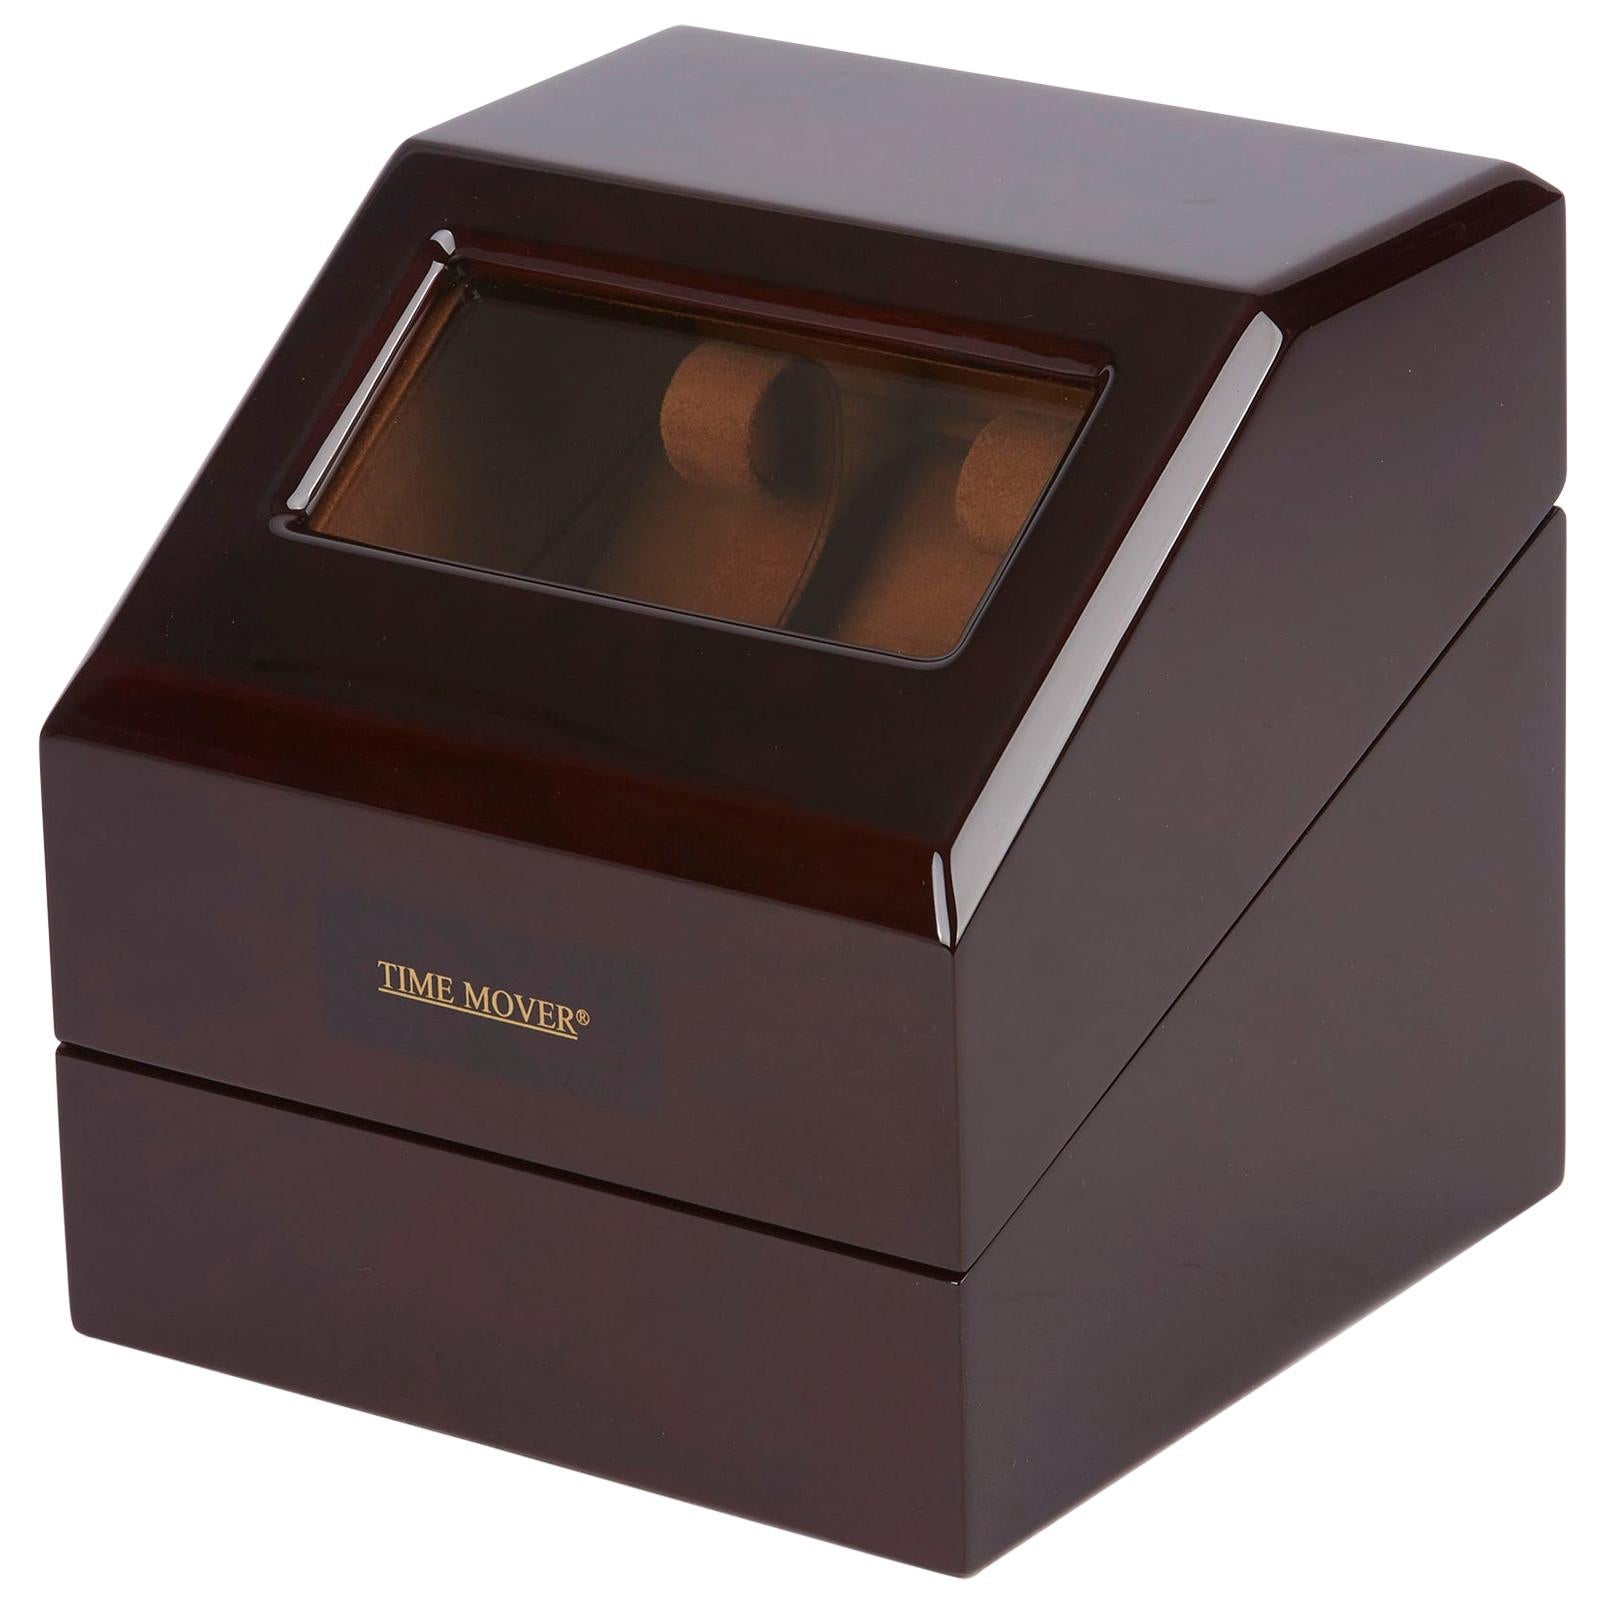 B&Z Time Mover Time Mover Watch Winder Time Mover at 1stDibs | b&z watch  winder, watch mover